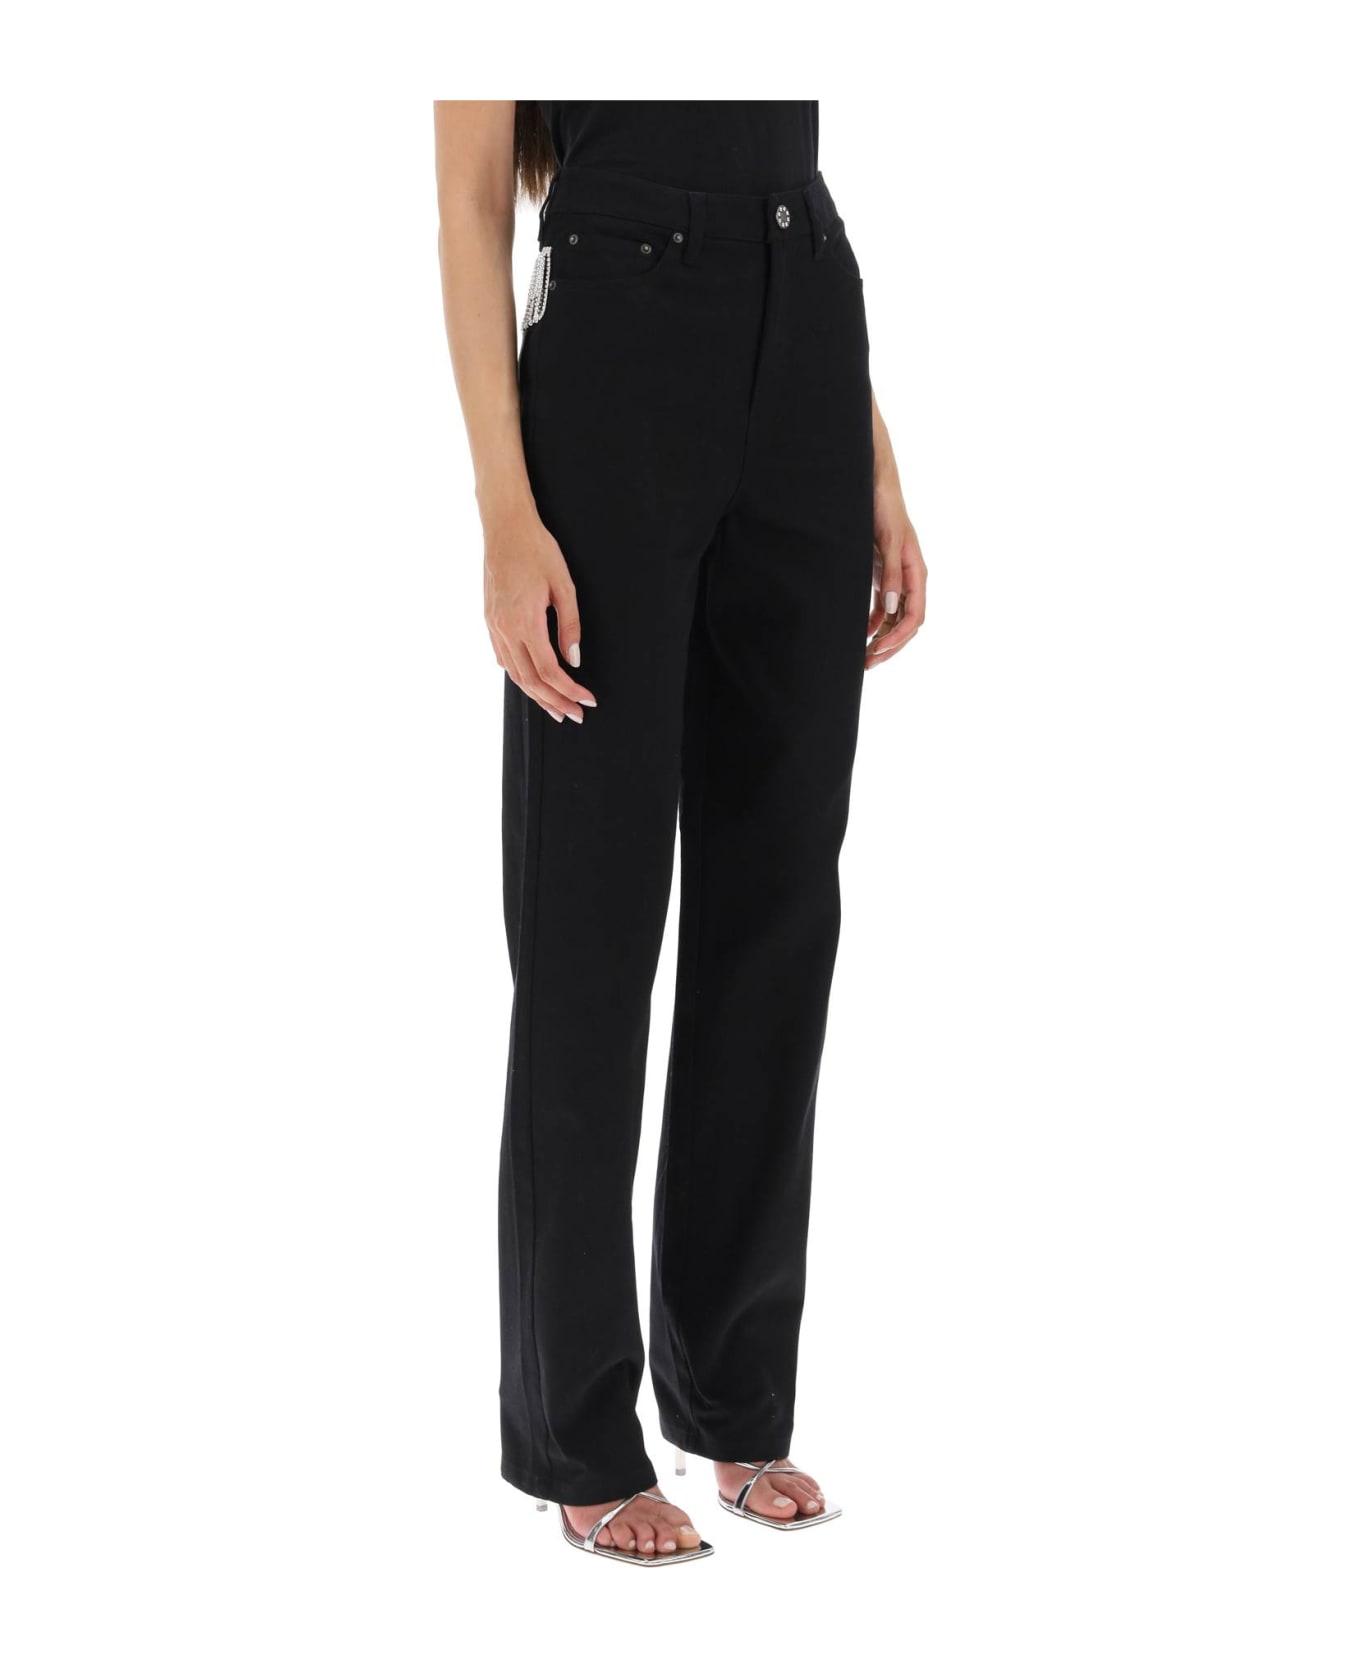 Rotate by Birger Christensen Trousers With Rhinestones - BLACK